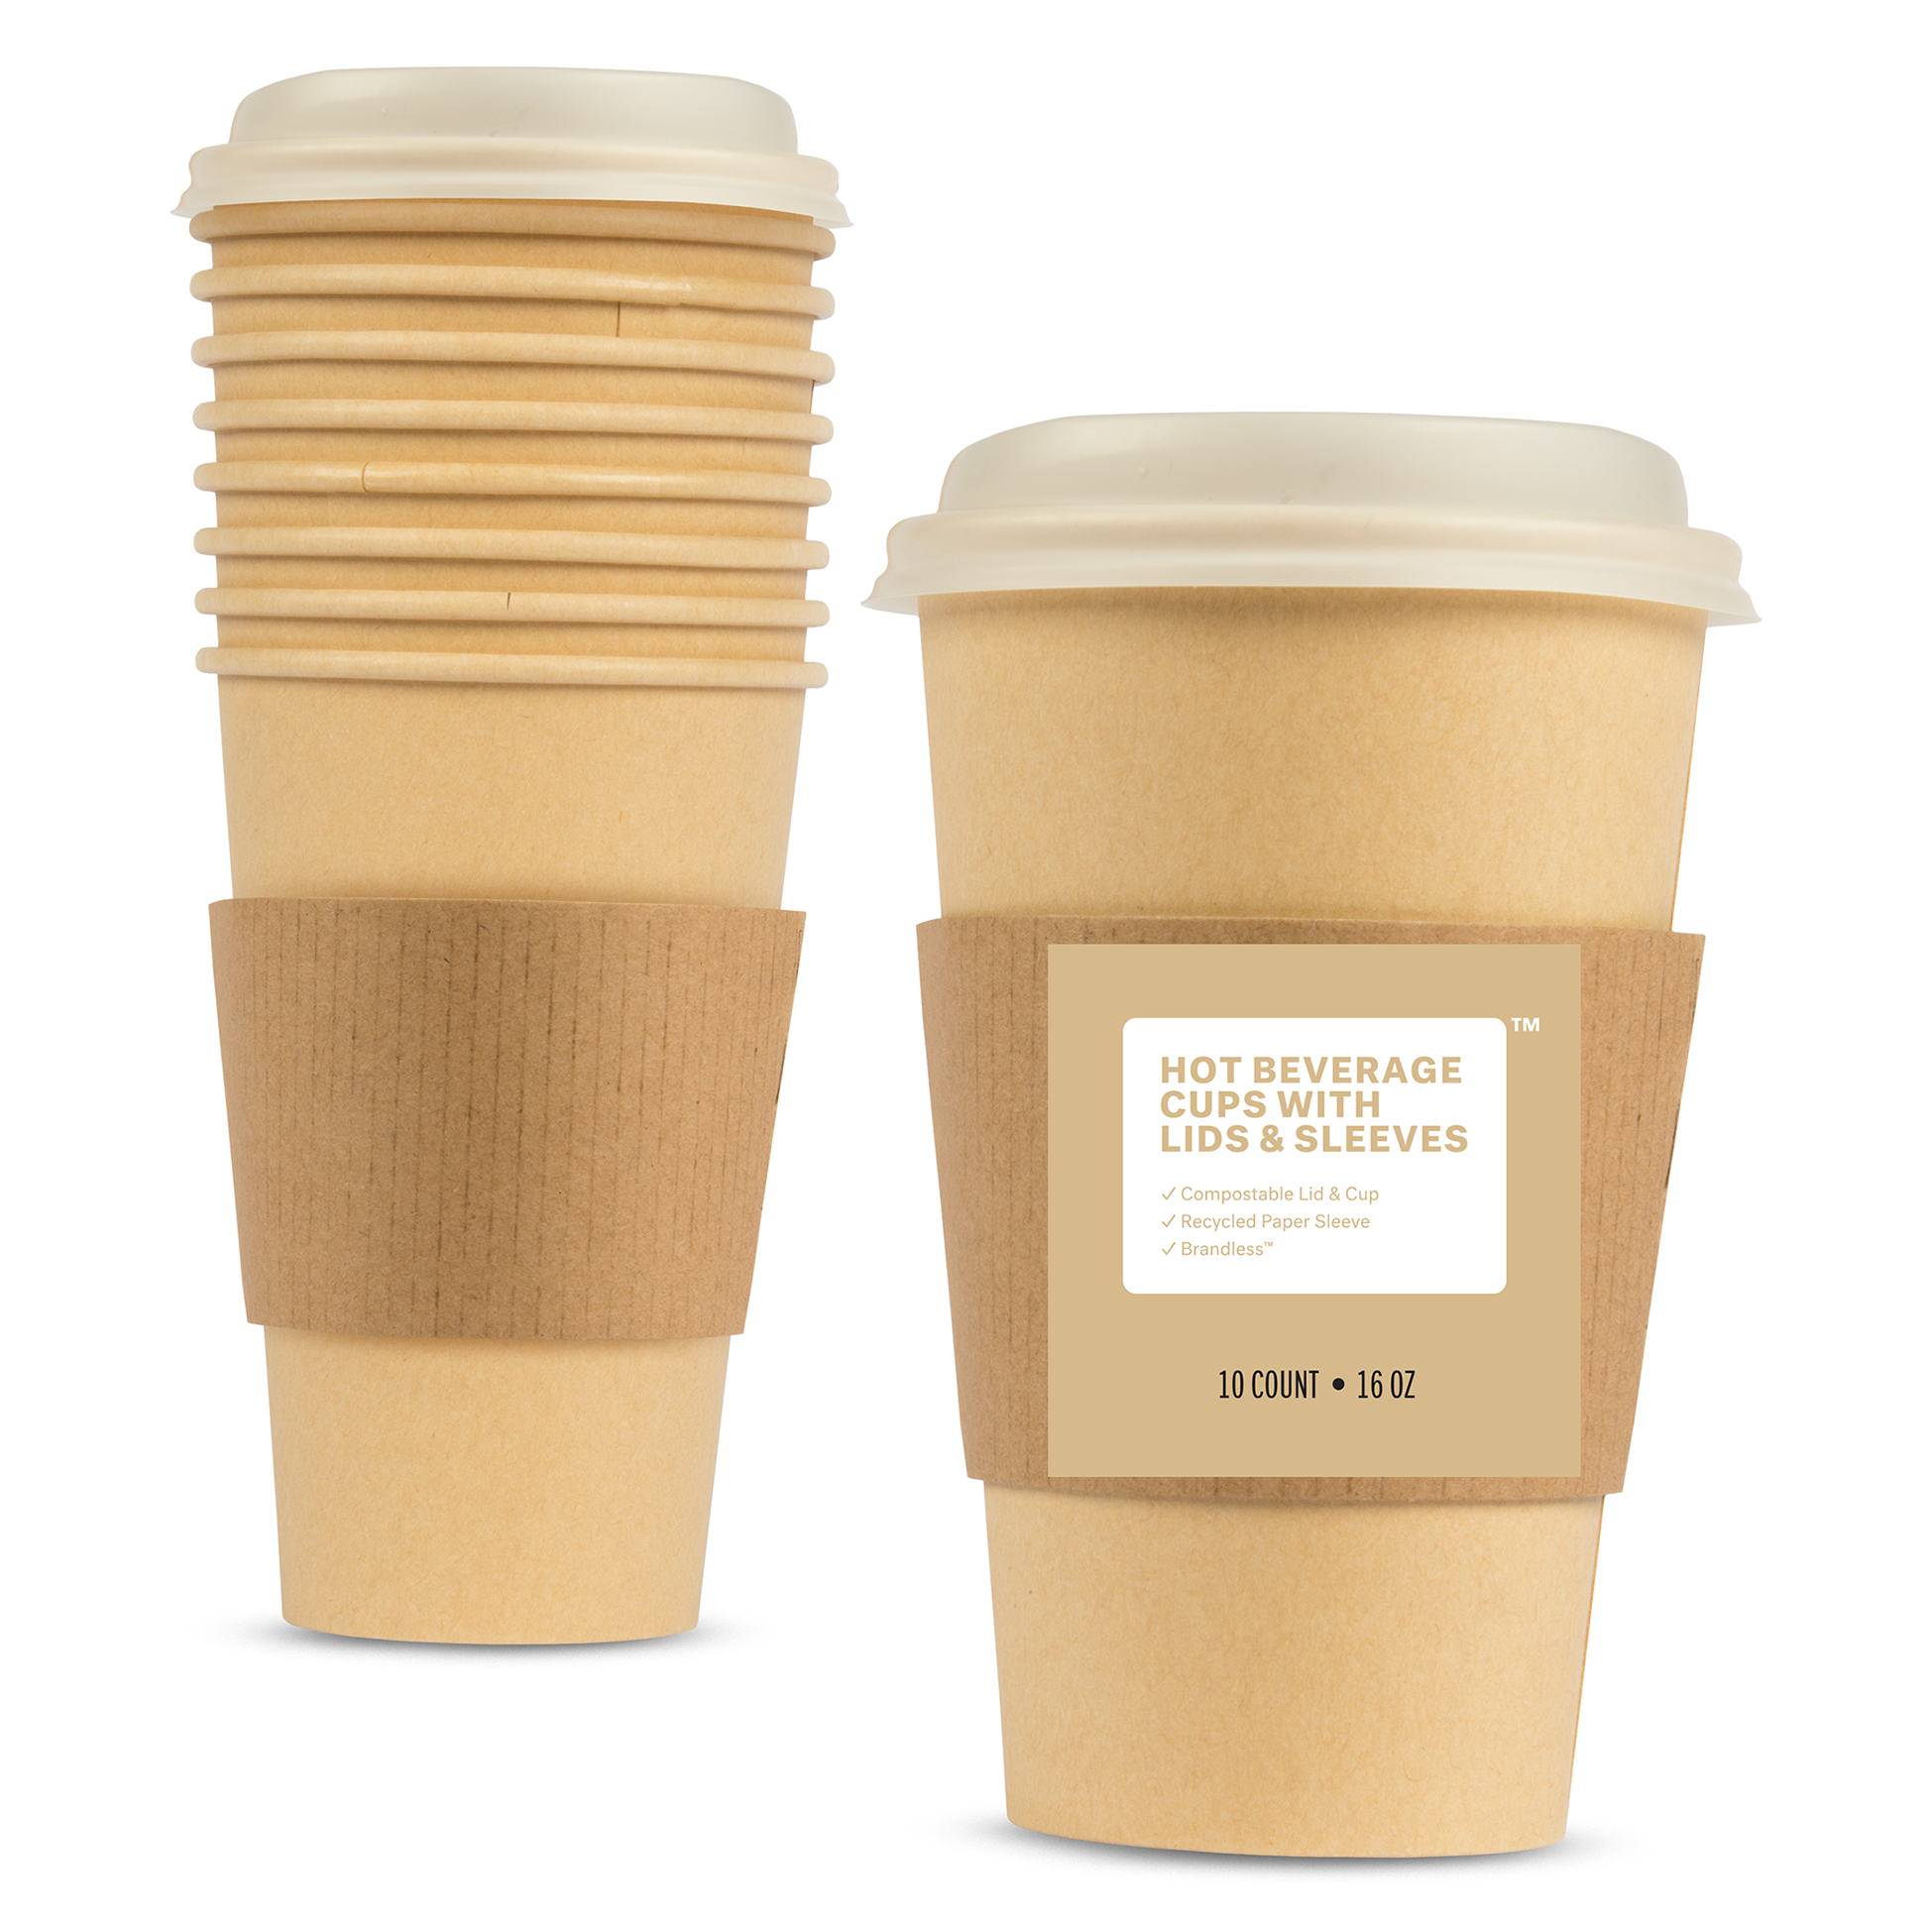 Hot Beverage Cups with Lids and Sleeves.  Front view, showing one assembled cup+lid+sleeve and a nested stack of the rest of the cups.